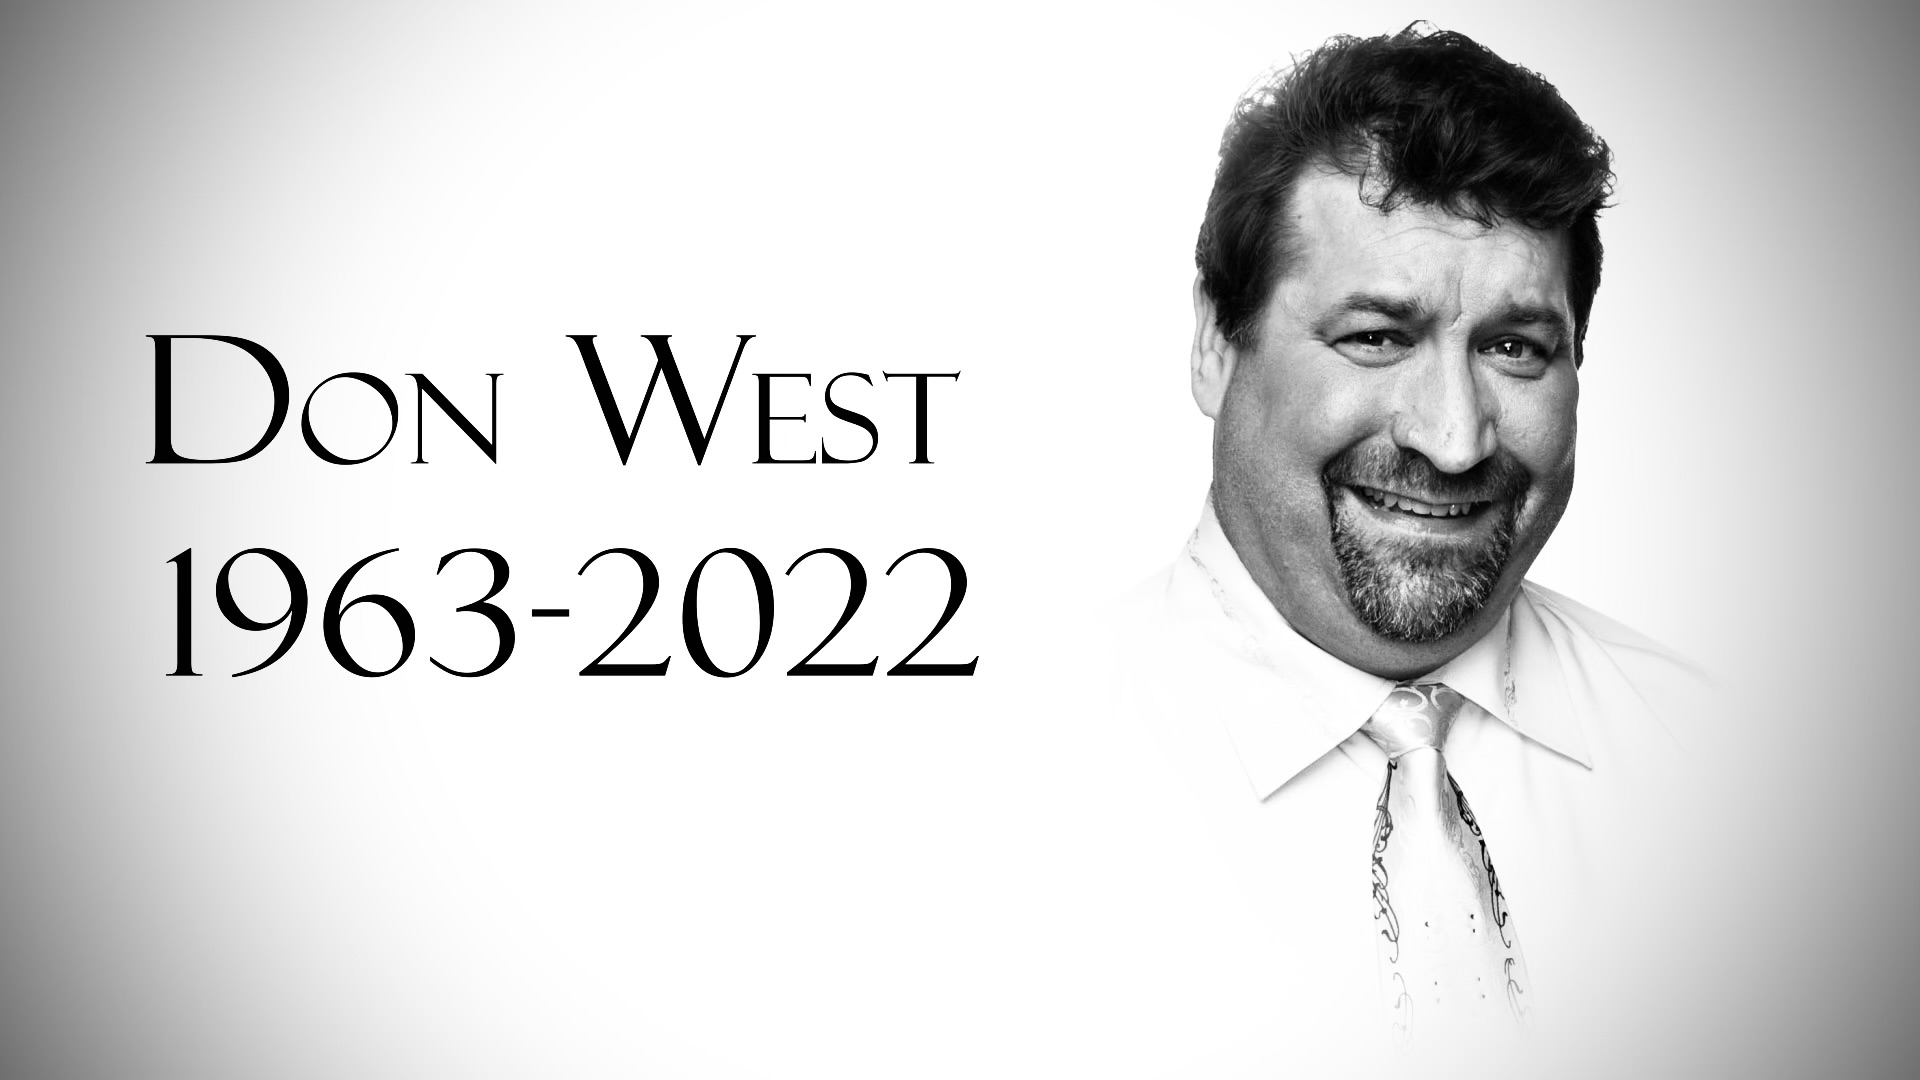 Scott D’Amore Reflects on the Passing of Don West